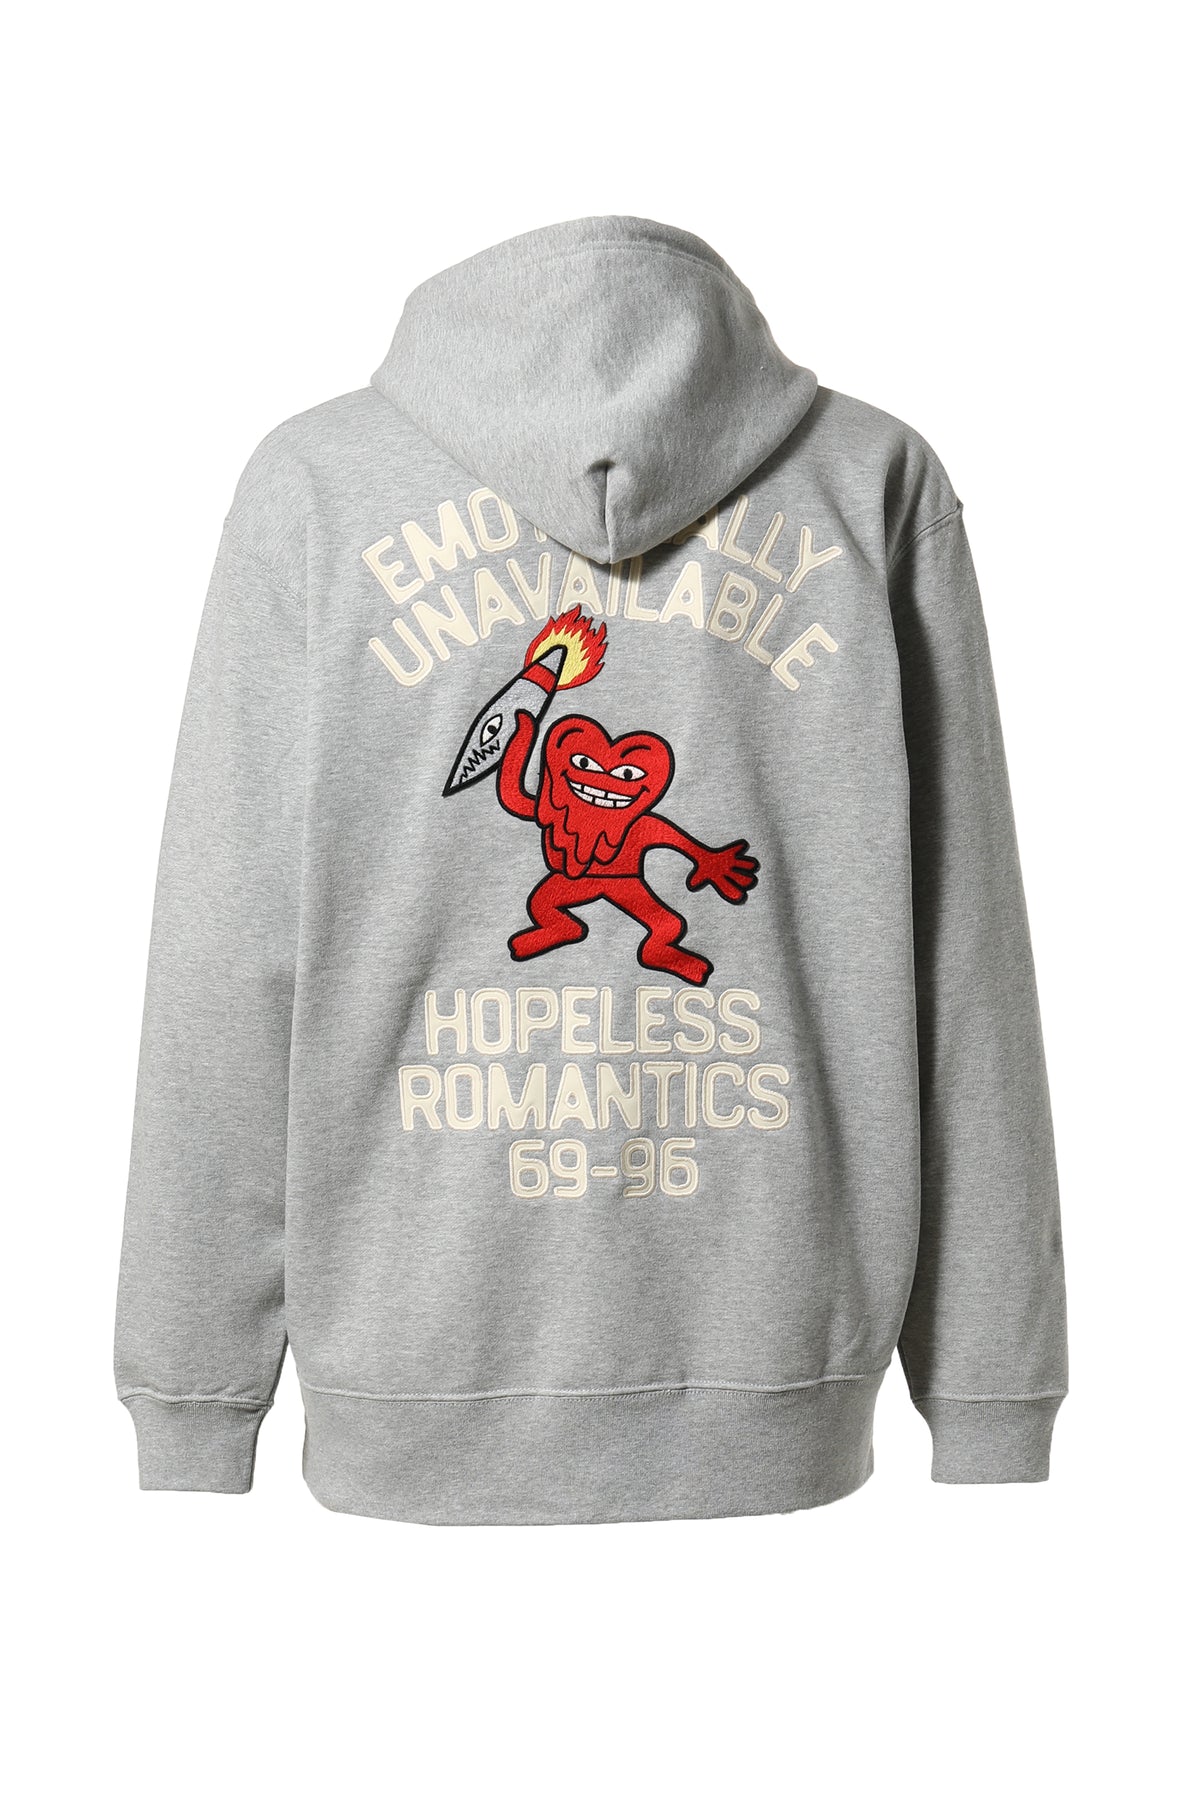 EMOTIONALLY UNAVAILABLE HOPELESS ROMANTIC HOODIE / H GRY